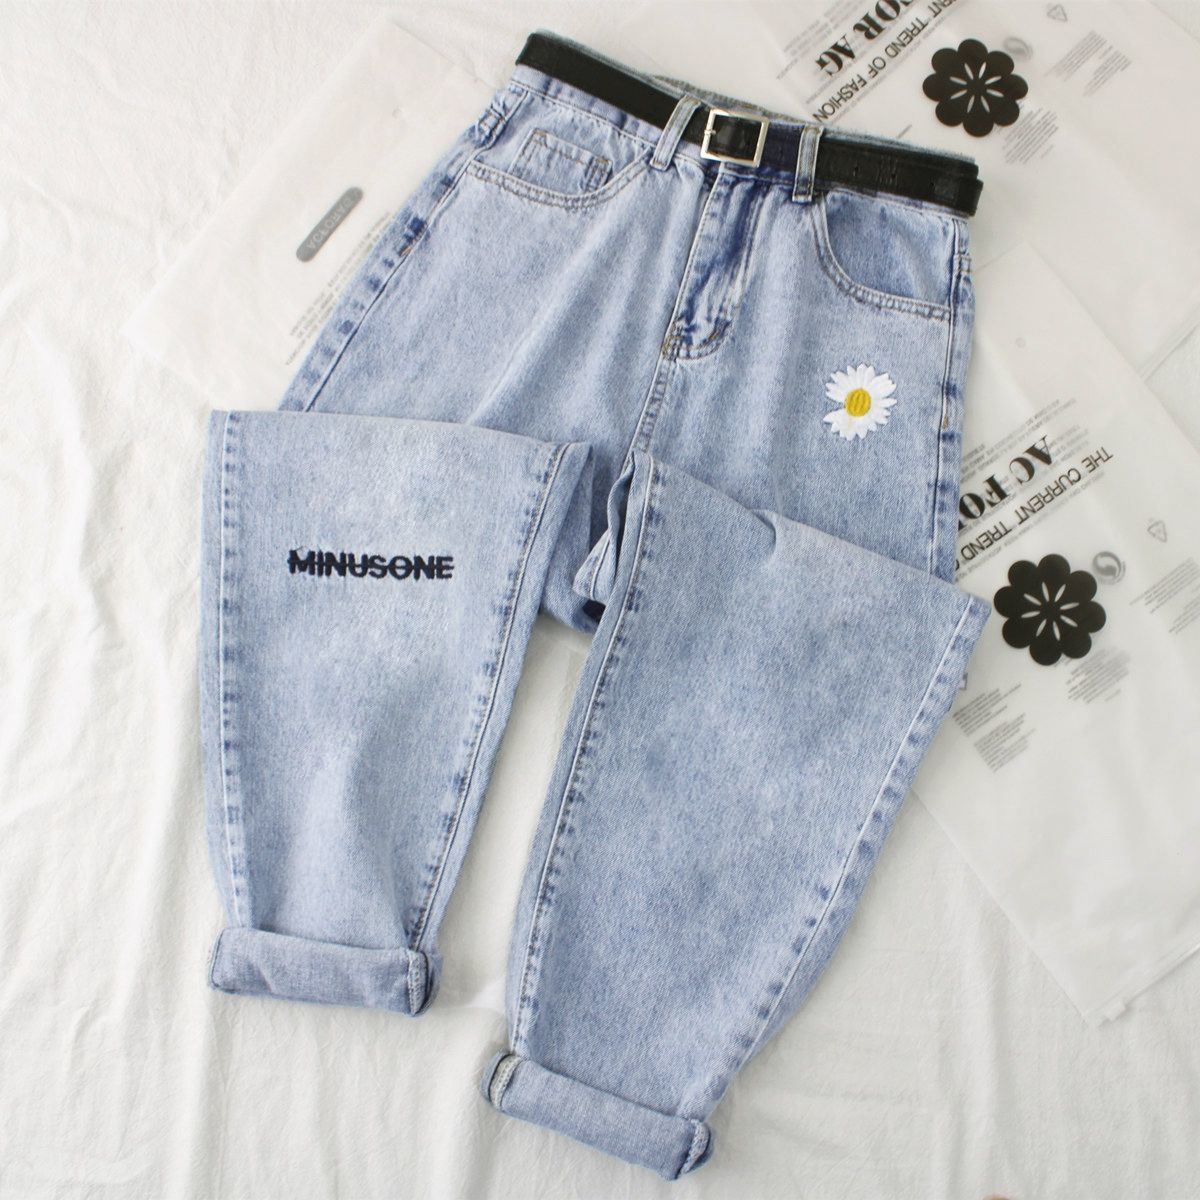 Daisy Embroidery Denim Jean Women High Waist Jeans Plus Size Denim Harem Trousers Mujer Vintage Casual Jeans Straight Women Pant